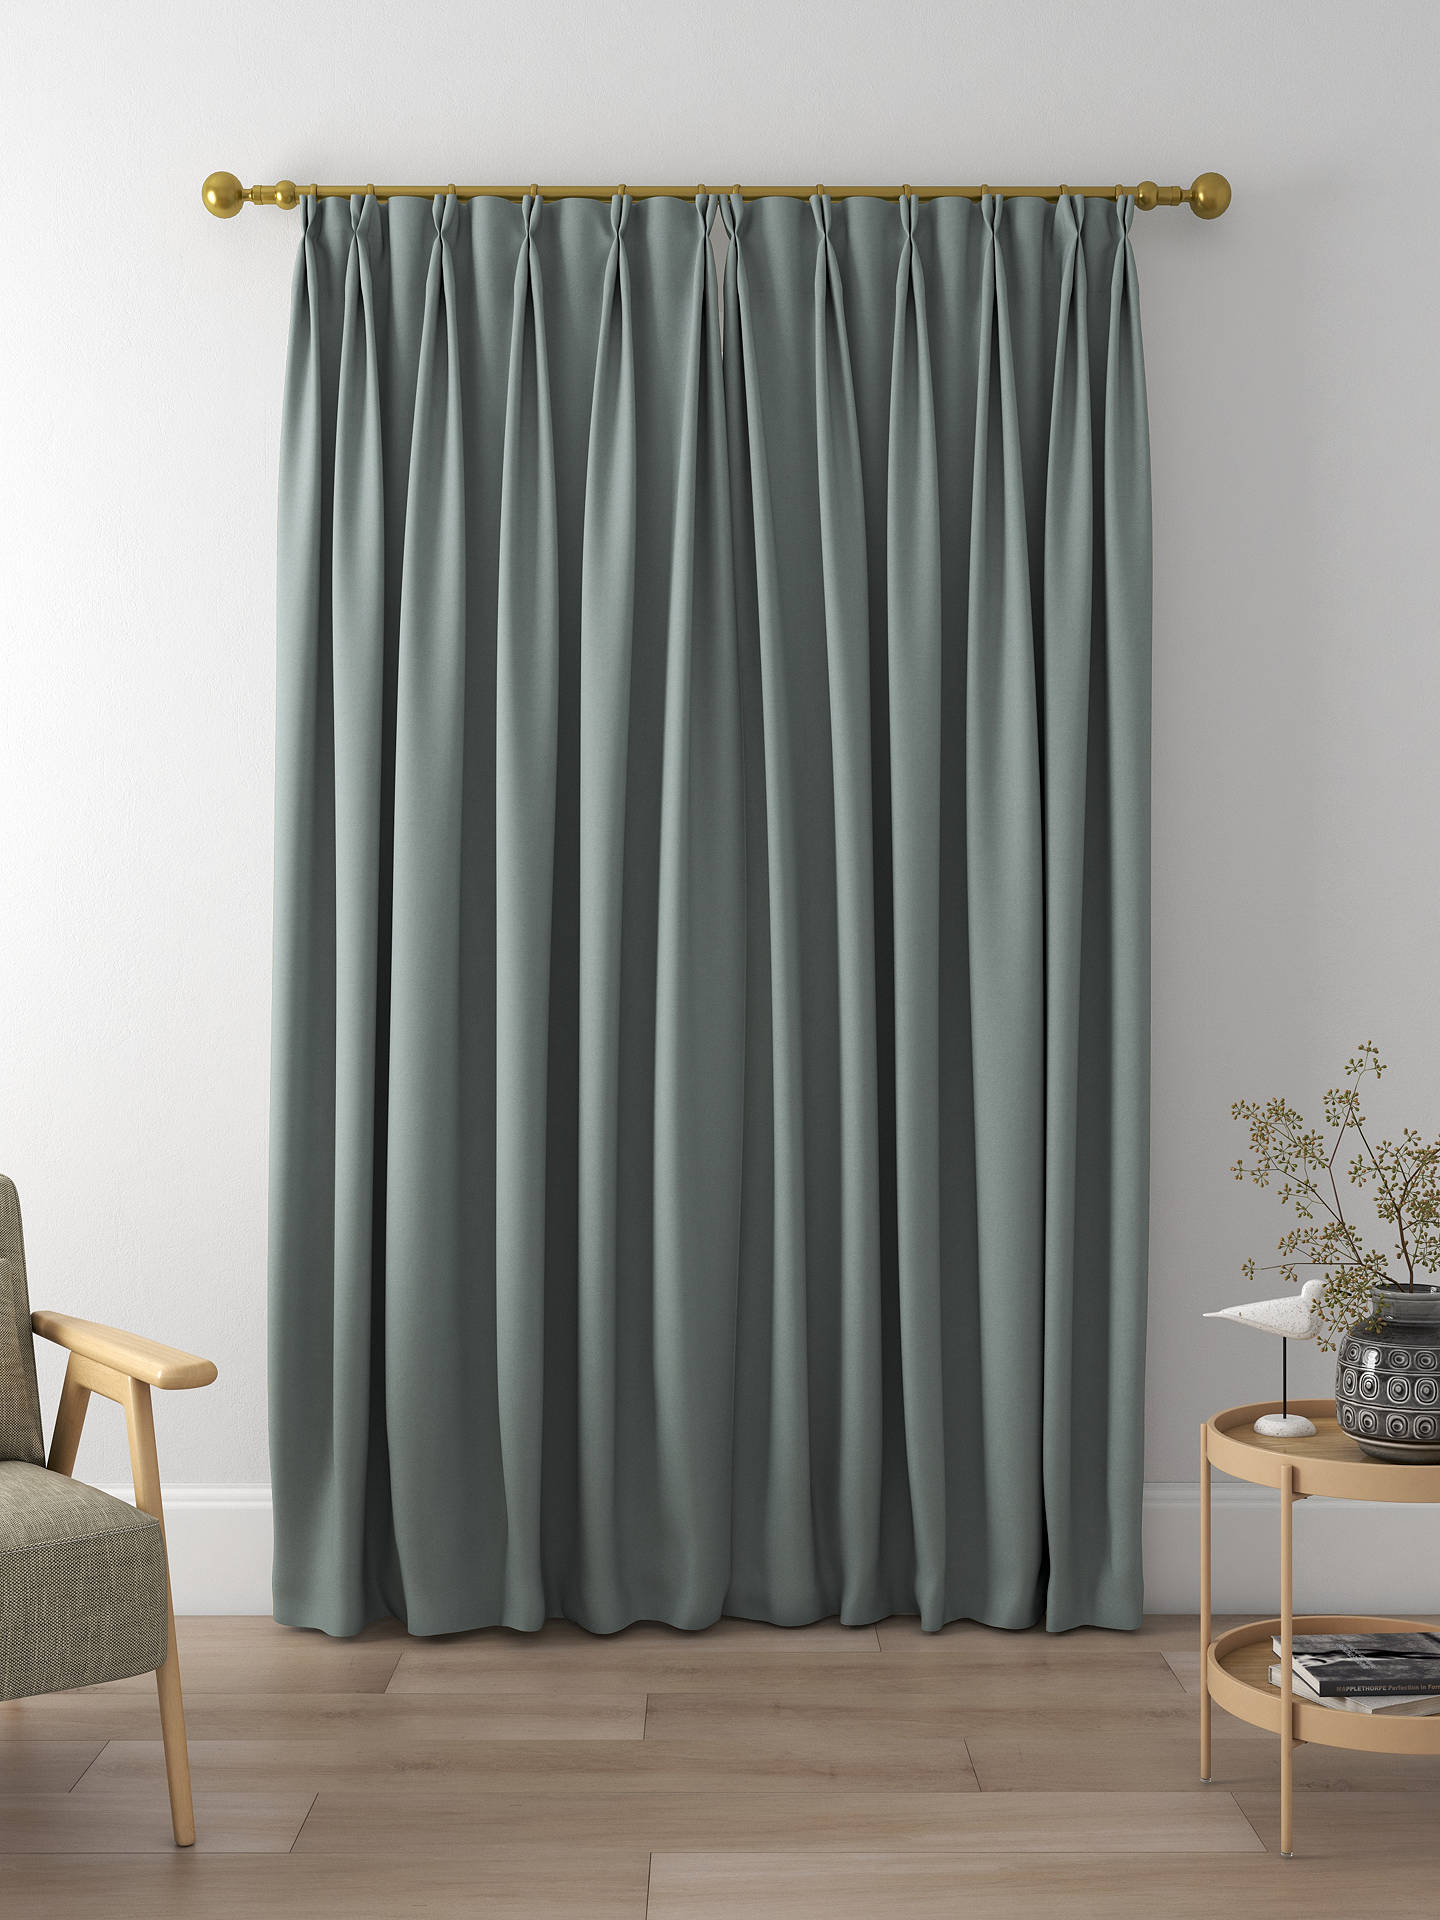 Harlequin Empower Plain Made to Measure Curtains, Elephant Grey